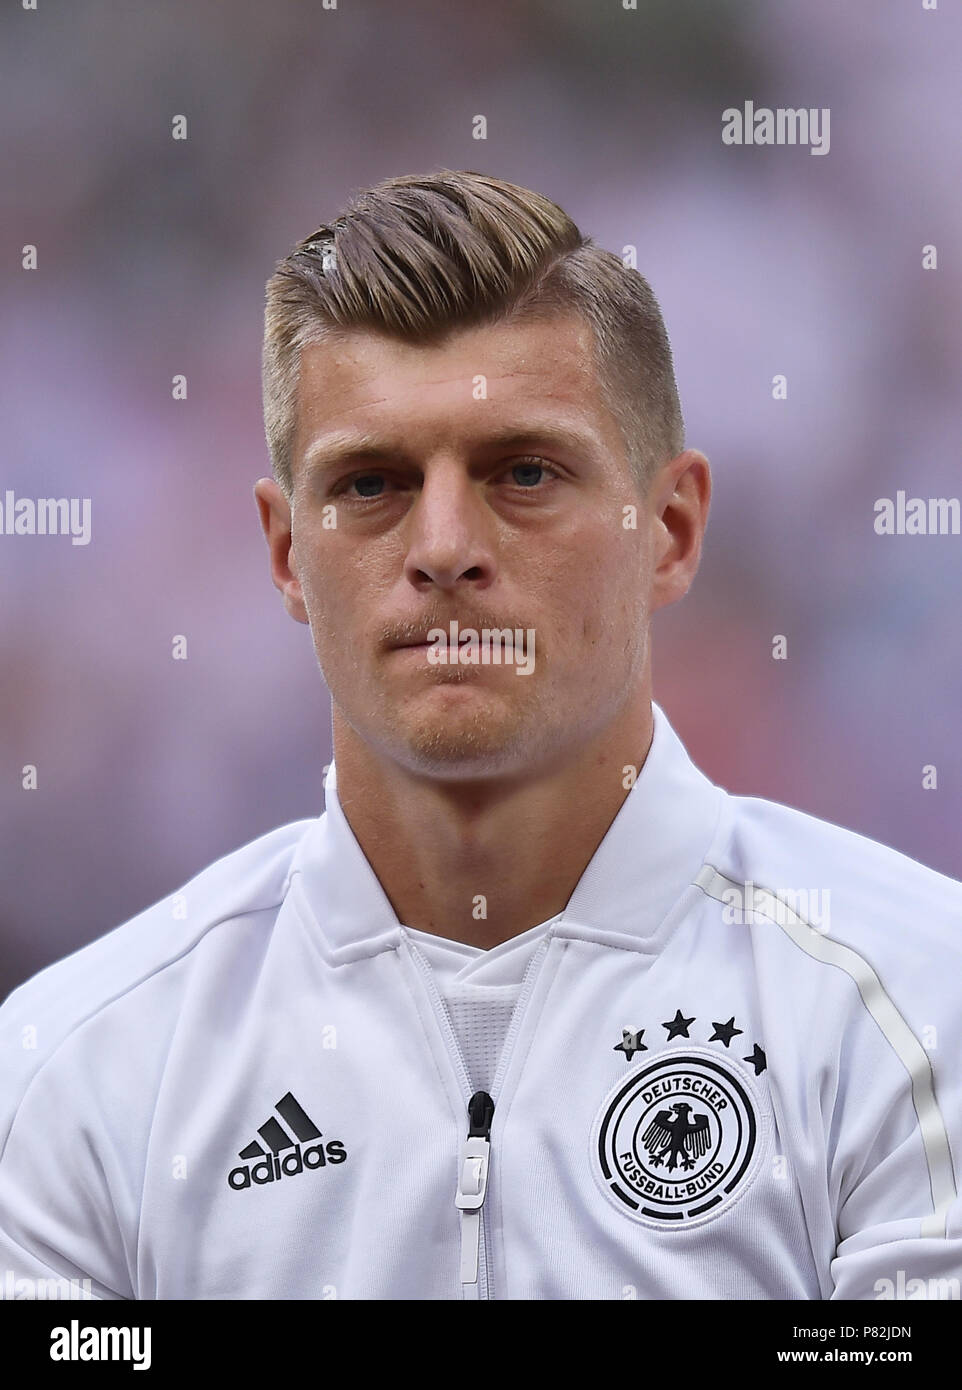 Toni Kroos High Resolution Stock Photography and Images - Alamy